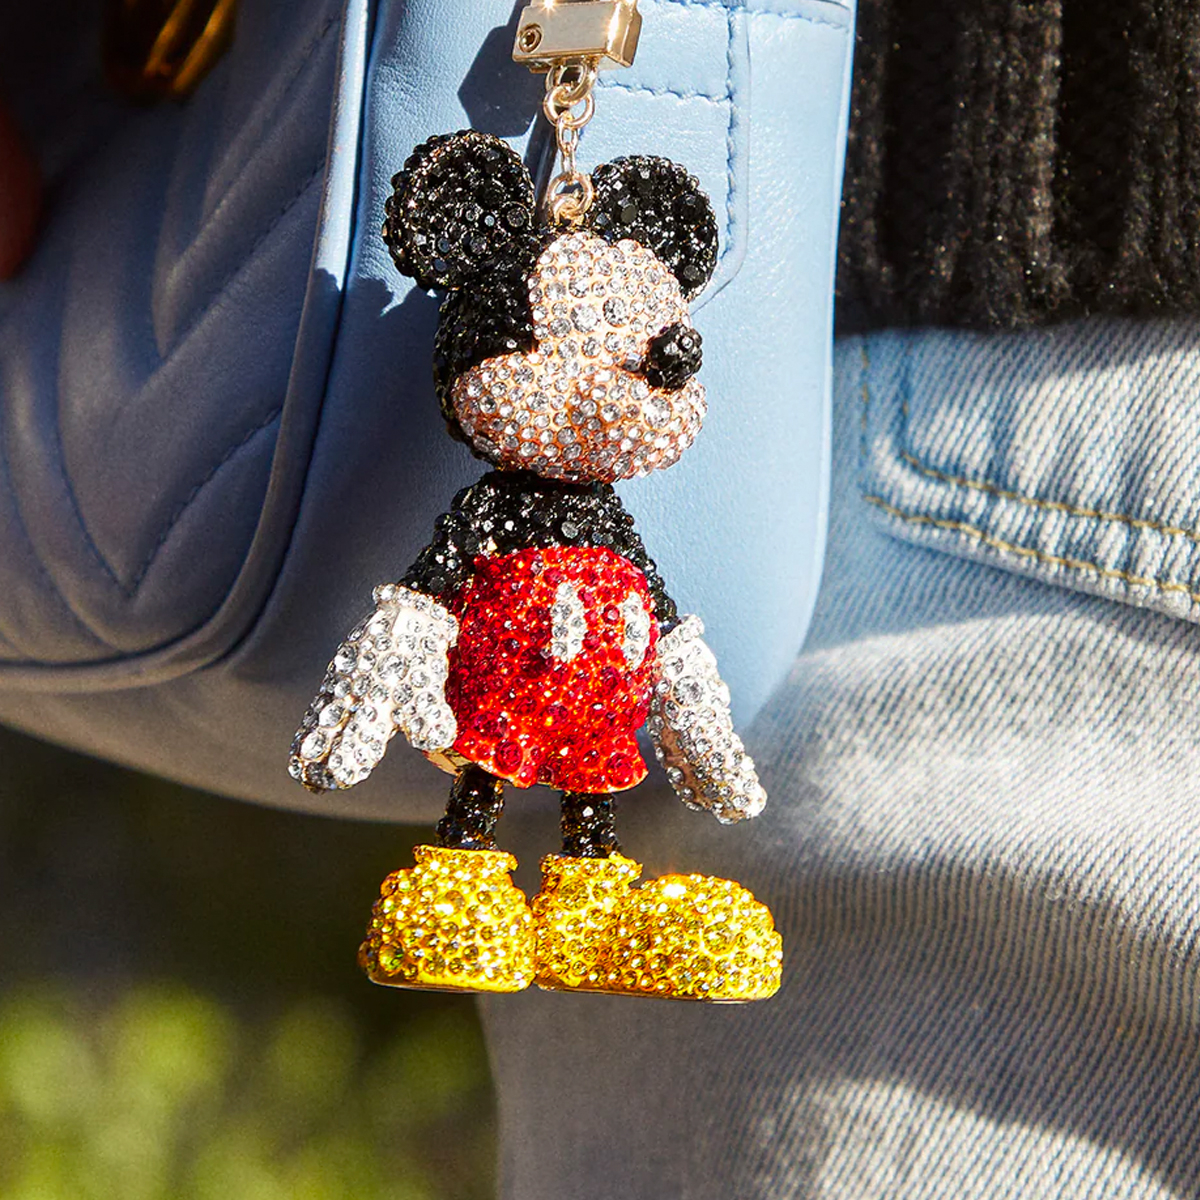 PHOTOS: New Minnie and Mickey Halloween Earrings by Baublebar at